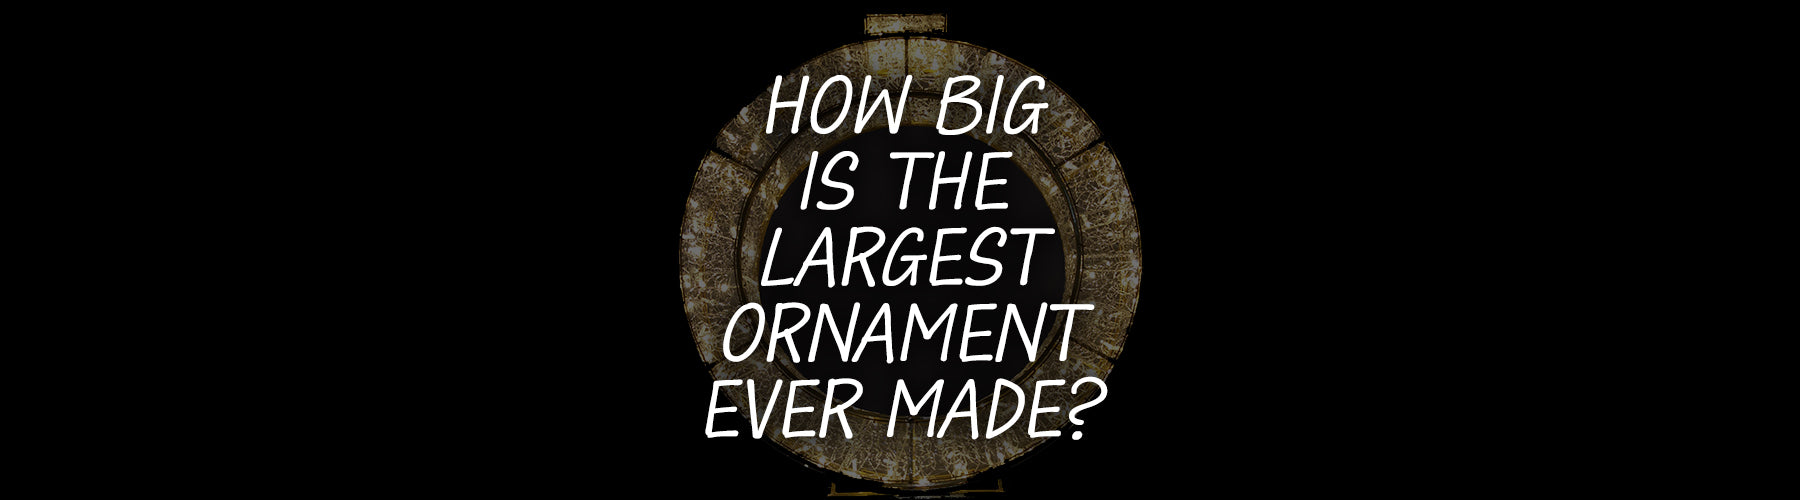 How Big is the Largest Ornament Ever Made?